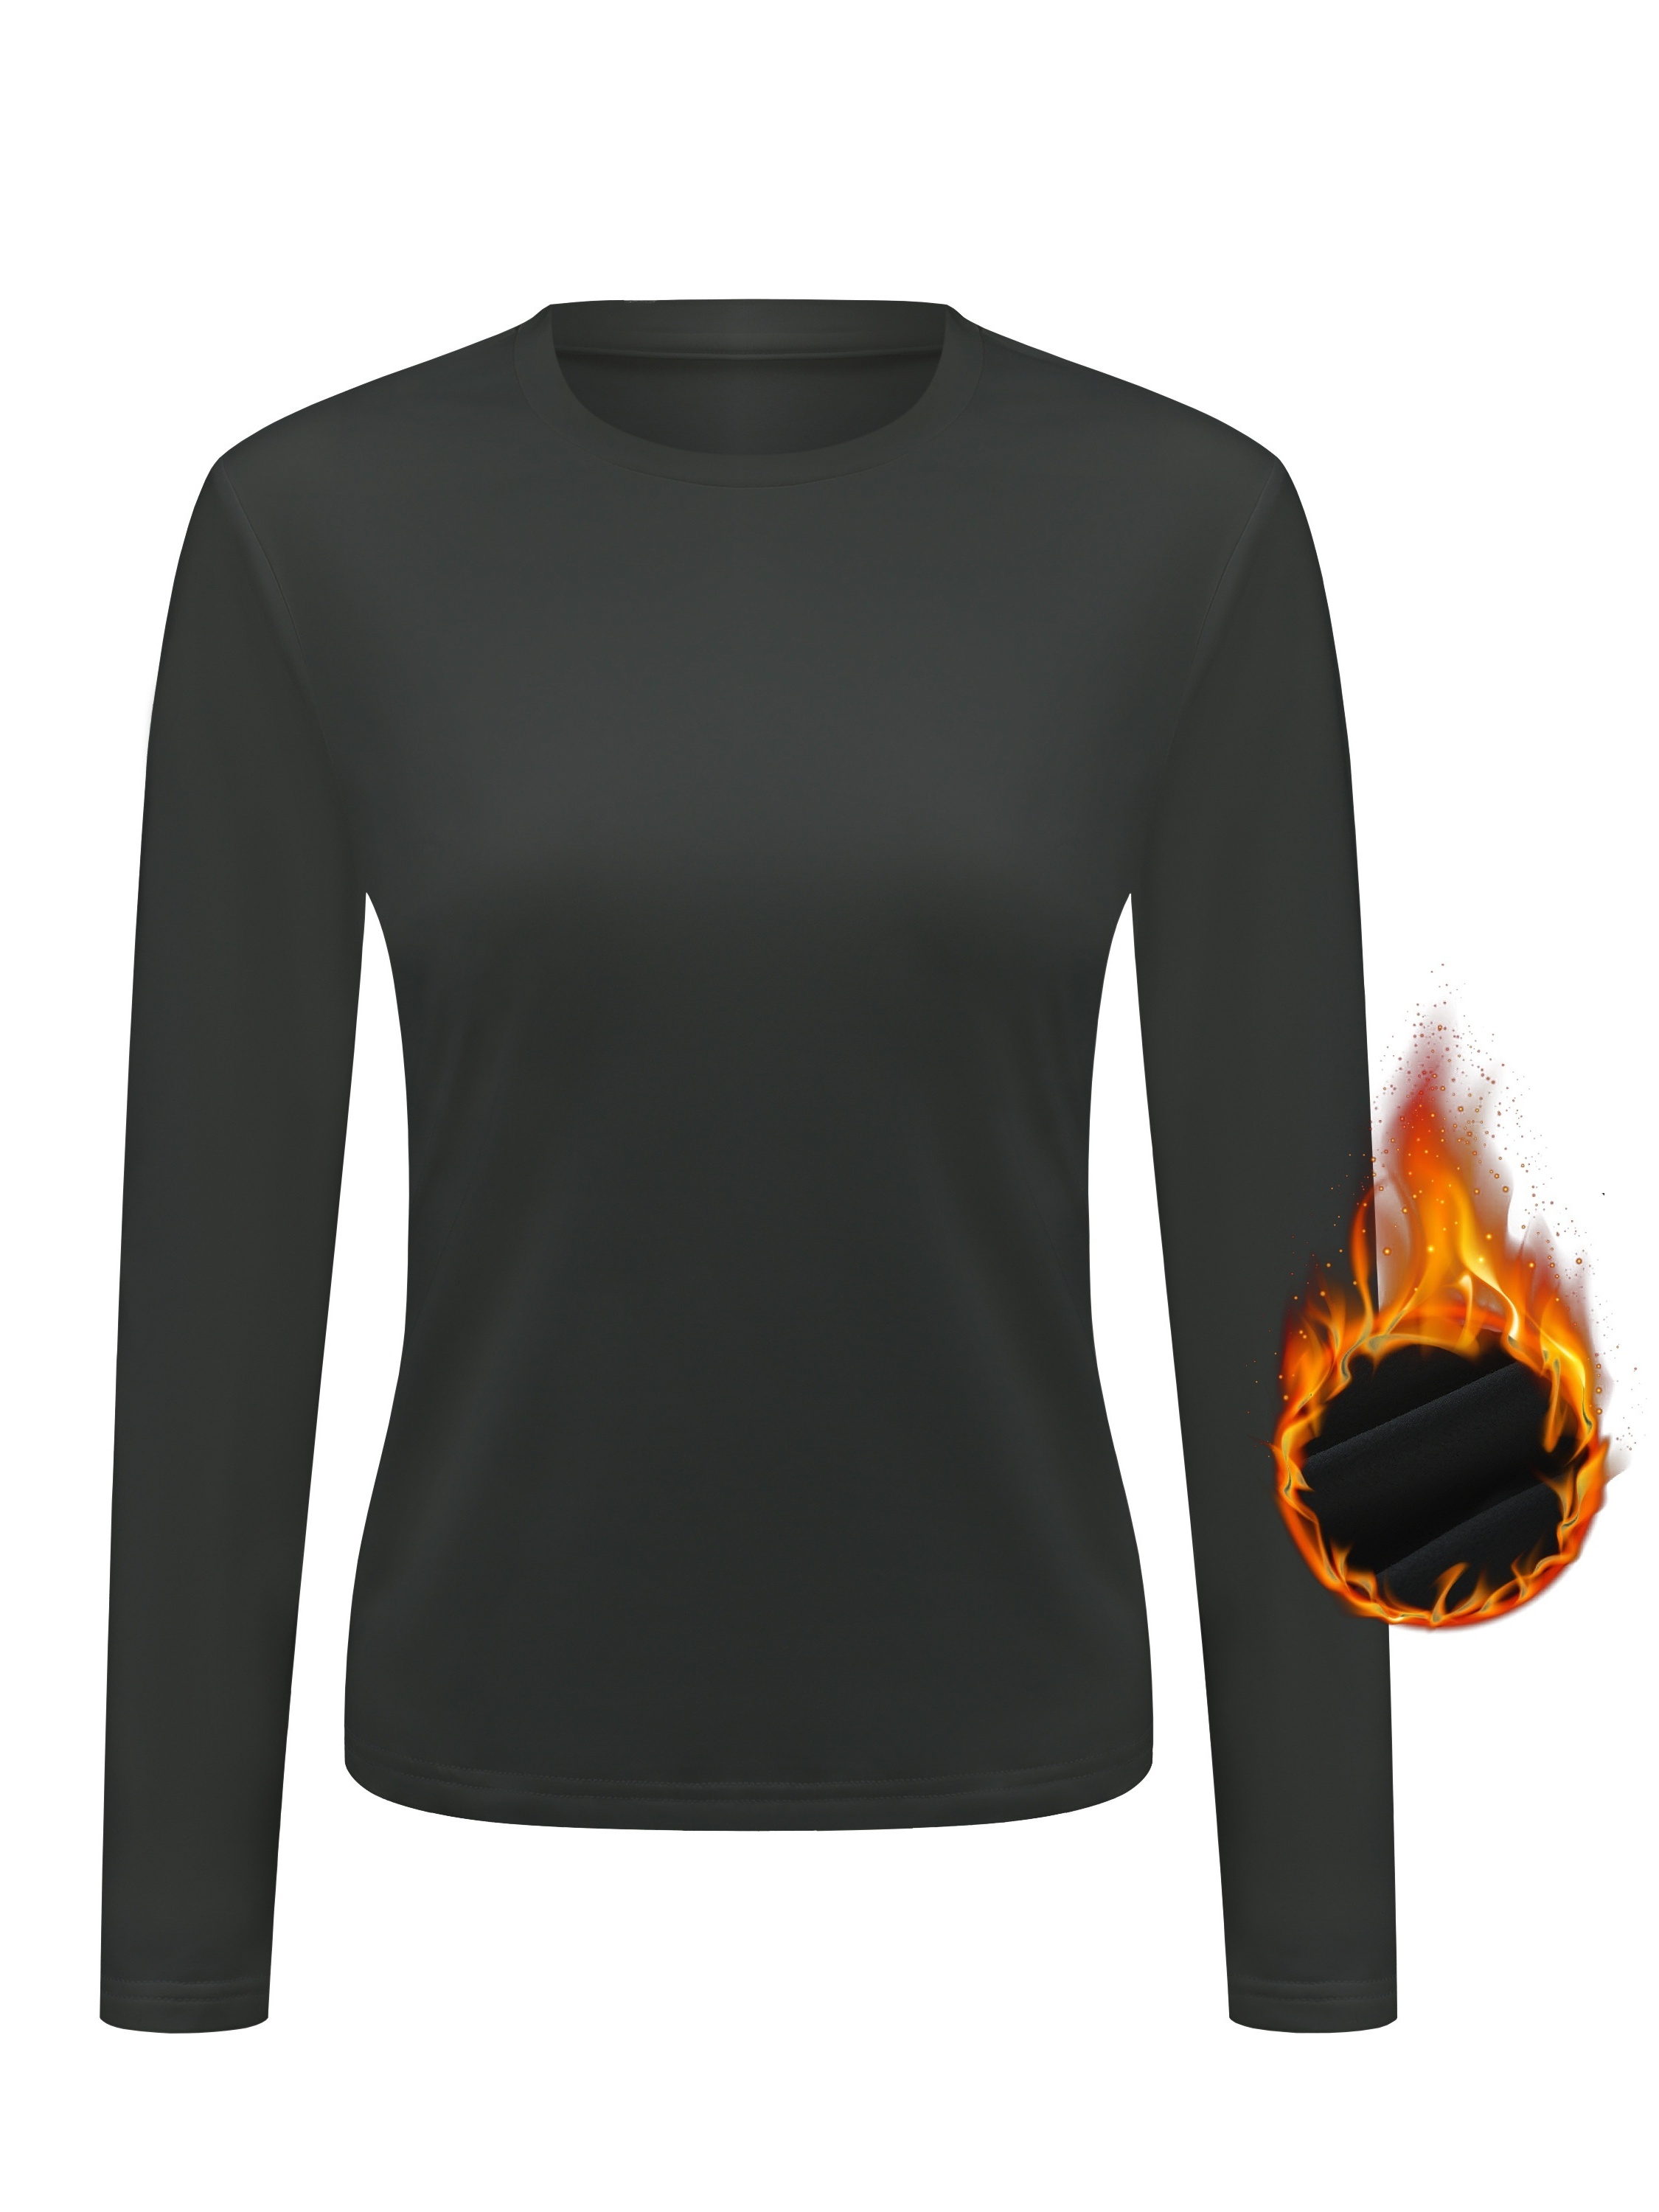 Women's Thermal Tops, Solid Long Sleeve Crew Neck Shirts, Women's Warm  Underwear For Winter, Women's Clothing